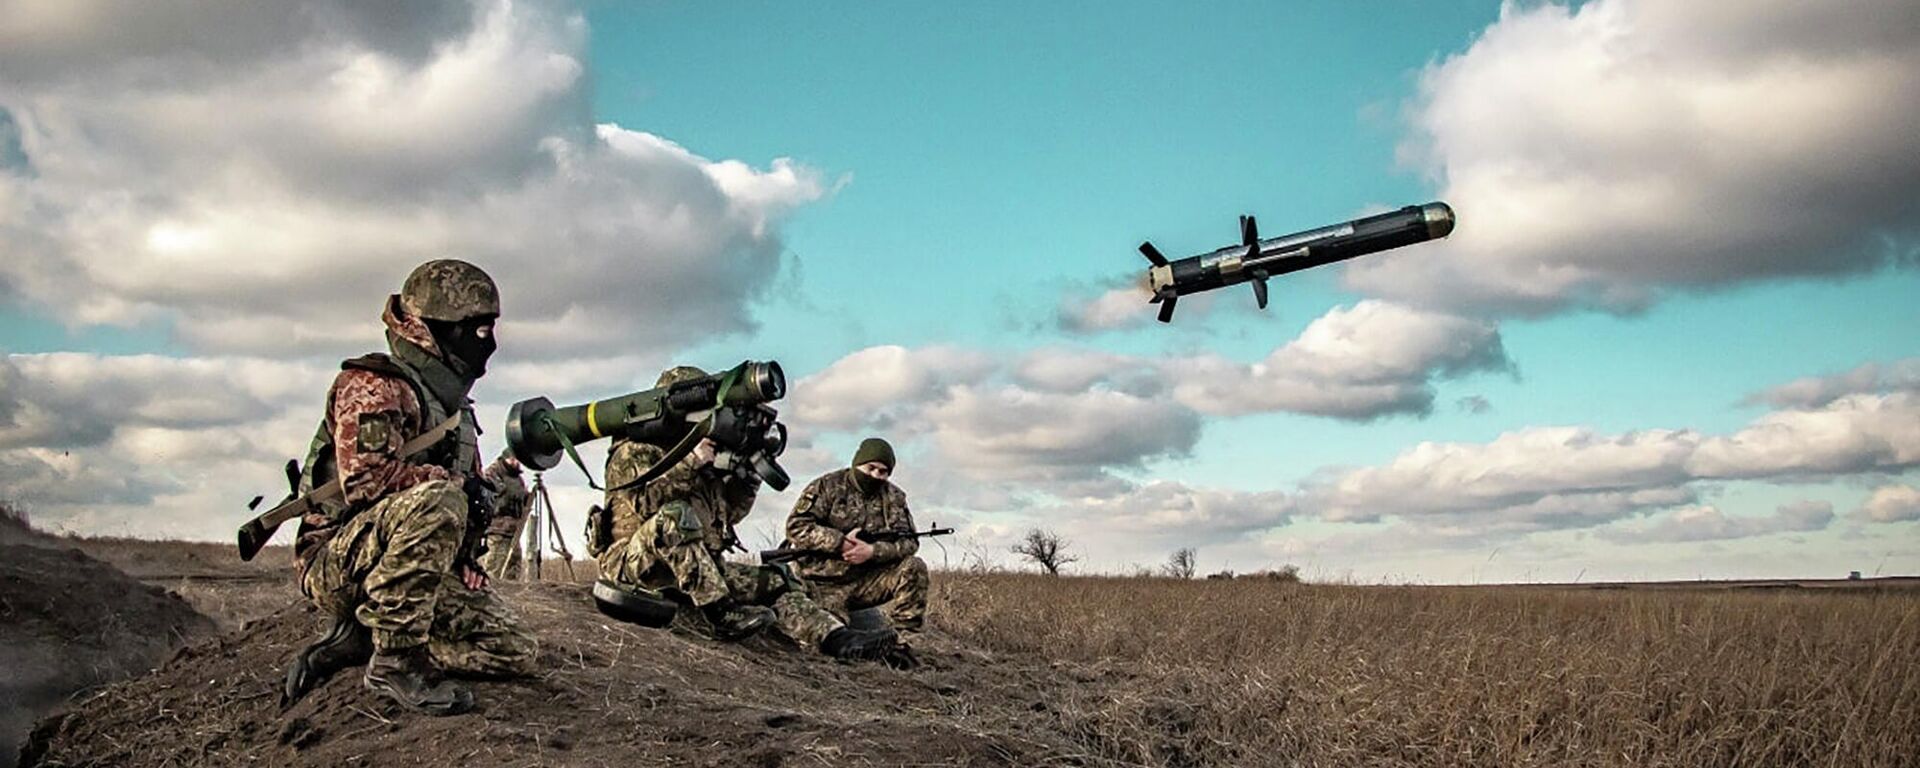 In this image released by the Ukrainian Defence Ministry Press Service, Ukrainian soldiers use a launcher with US Javelin missiles during military exercises in the Donetsk Region, Thursday, Dec. 23, 2021. - Sputnik International, 1920, 17.02.2022